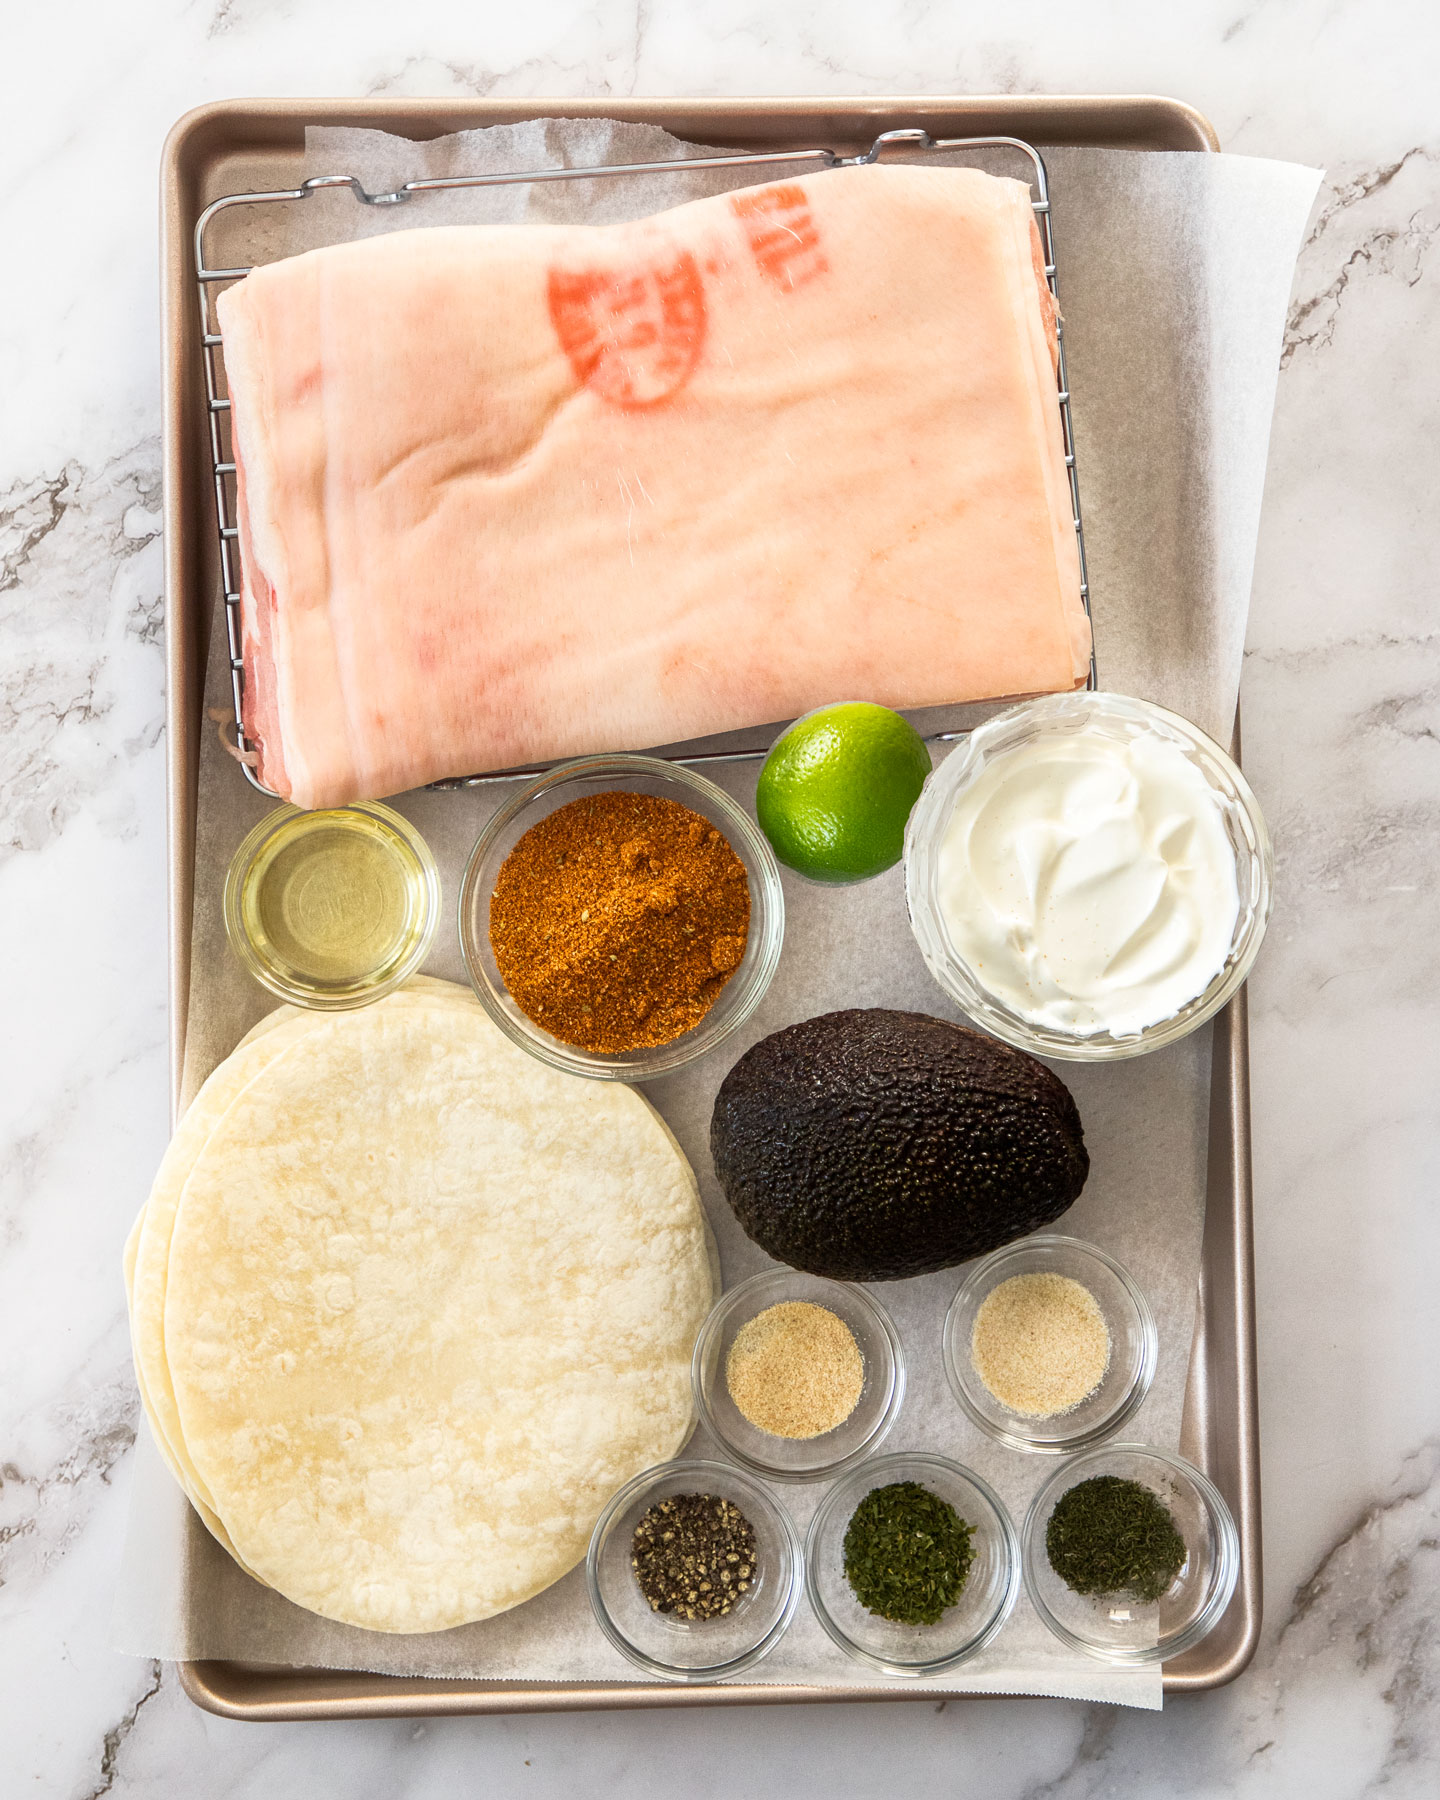 Ingredients for pork belly tacos on a baking tray.